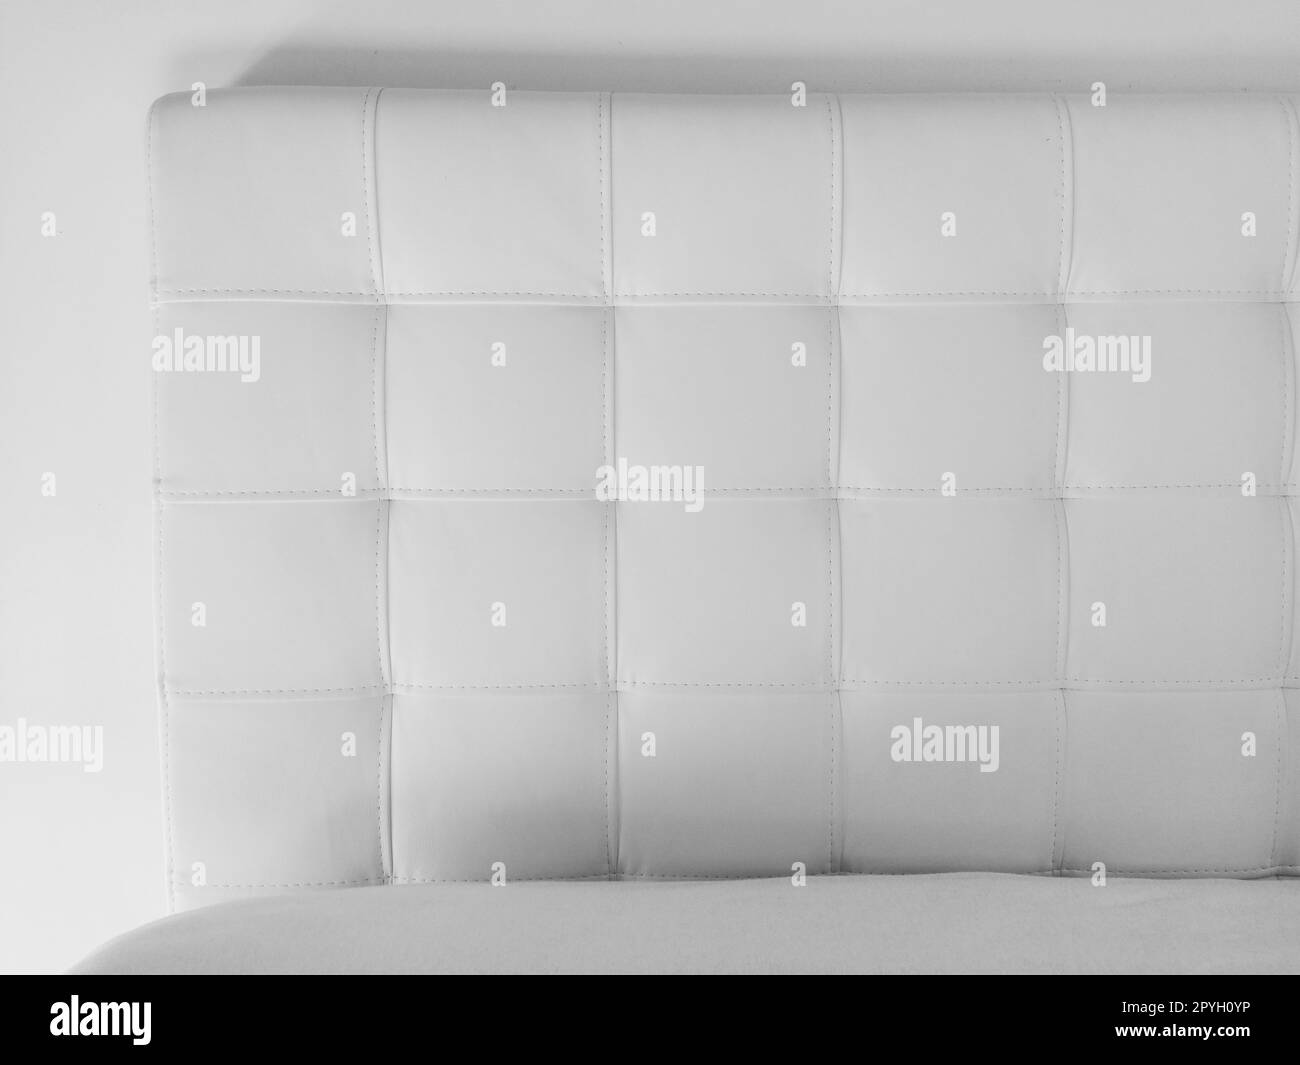 Soft headboard. Upholstery for furniture made of genuine or artificial leather and quilted fabric. Soft headboard against a light wall. Black and white monochrome photo Stock Photo